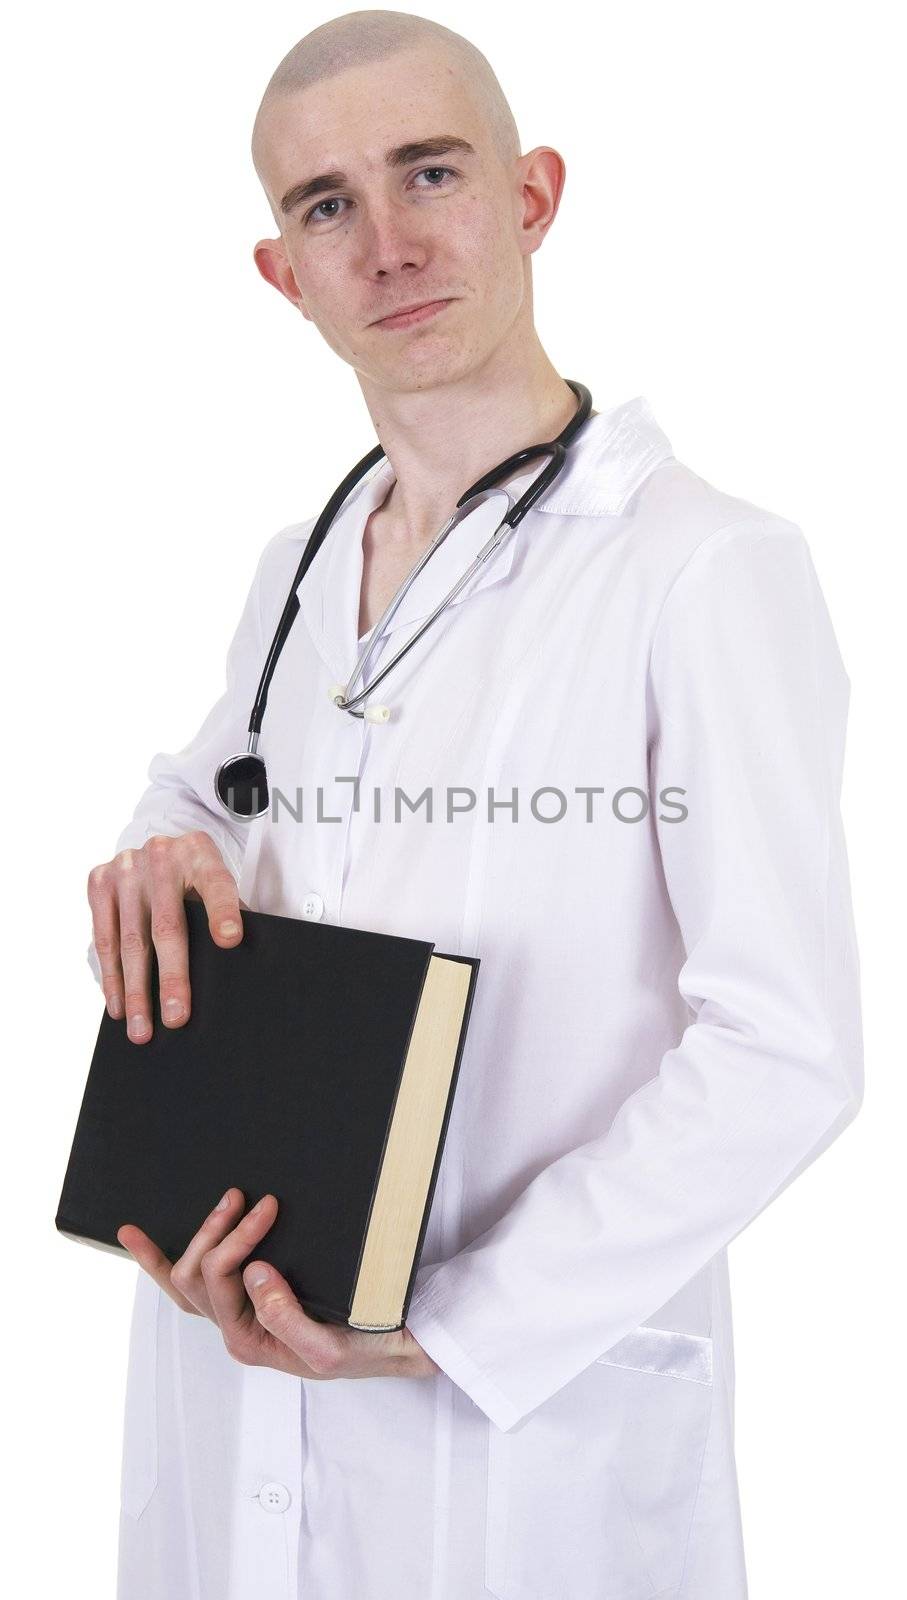 The doctor on a white background with a book and stetoscope